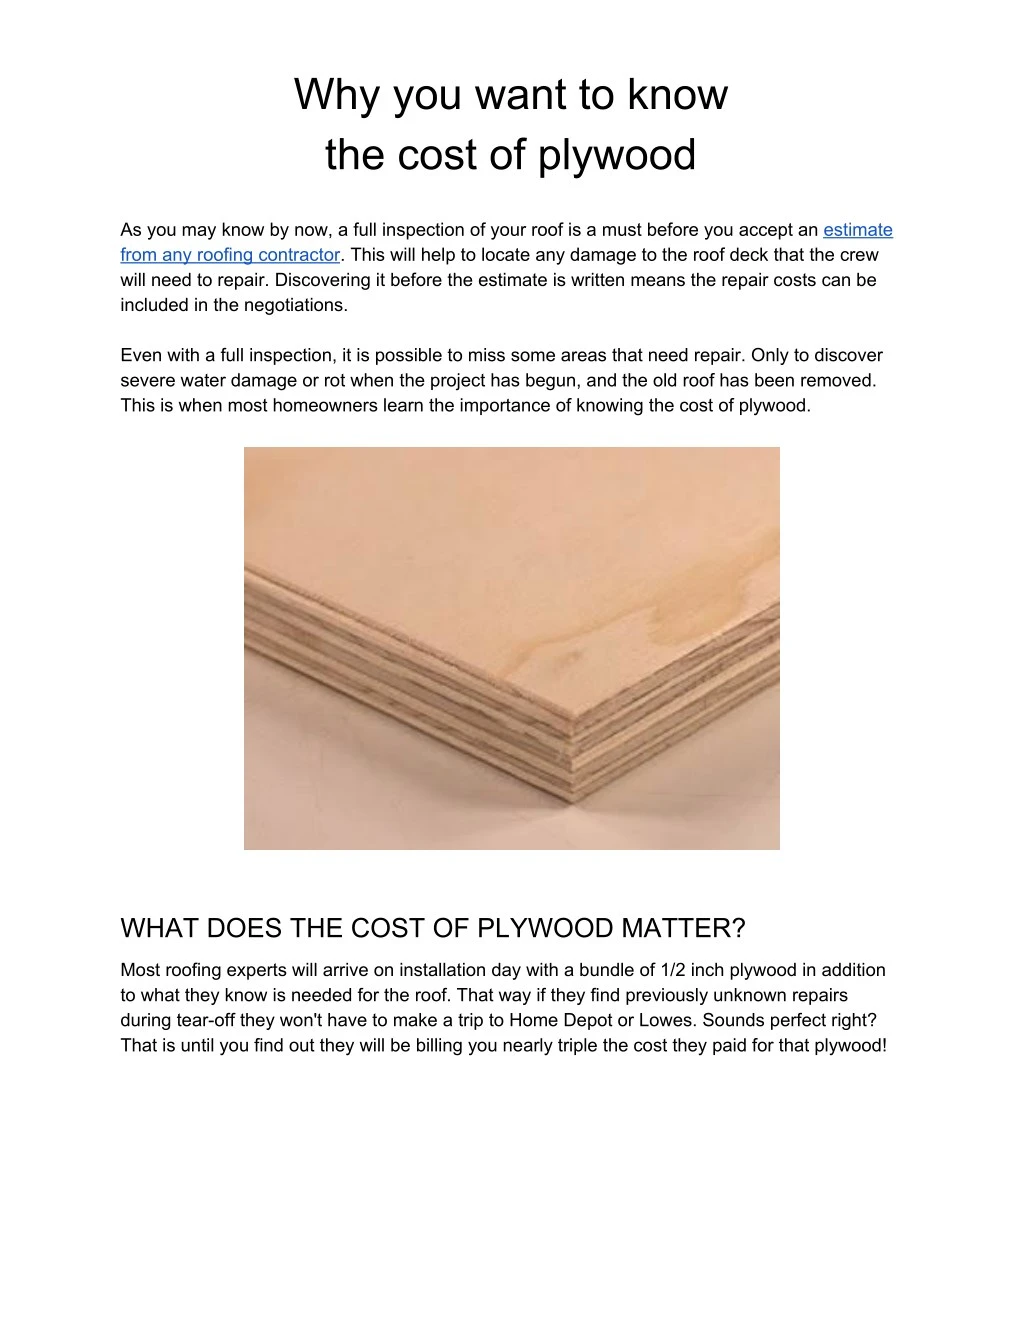 why you want to know the cost of plywood